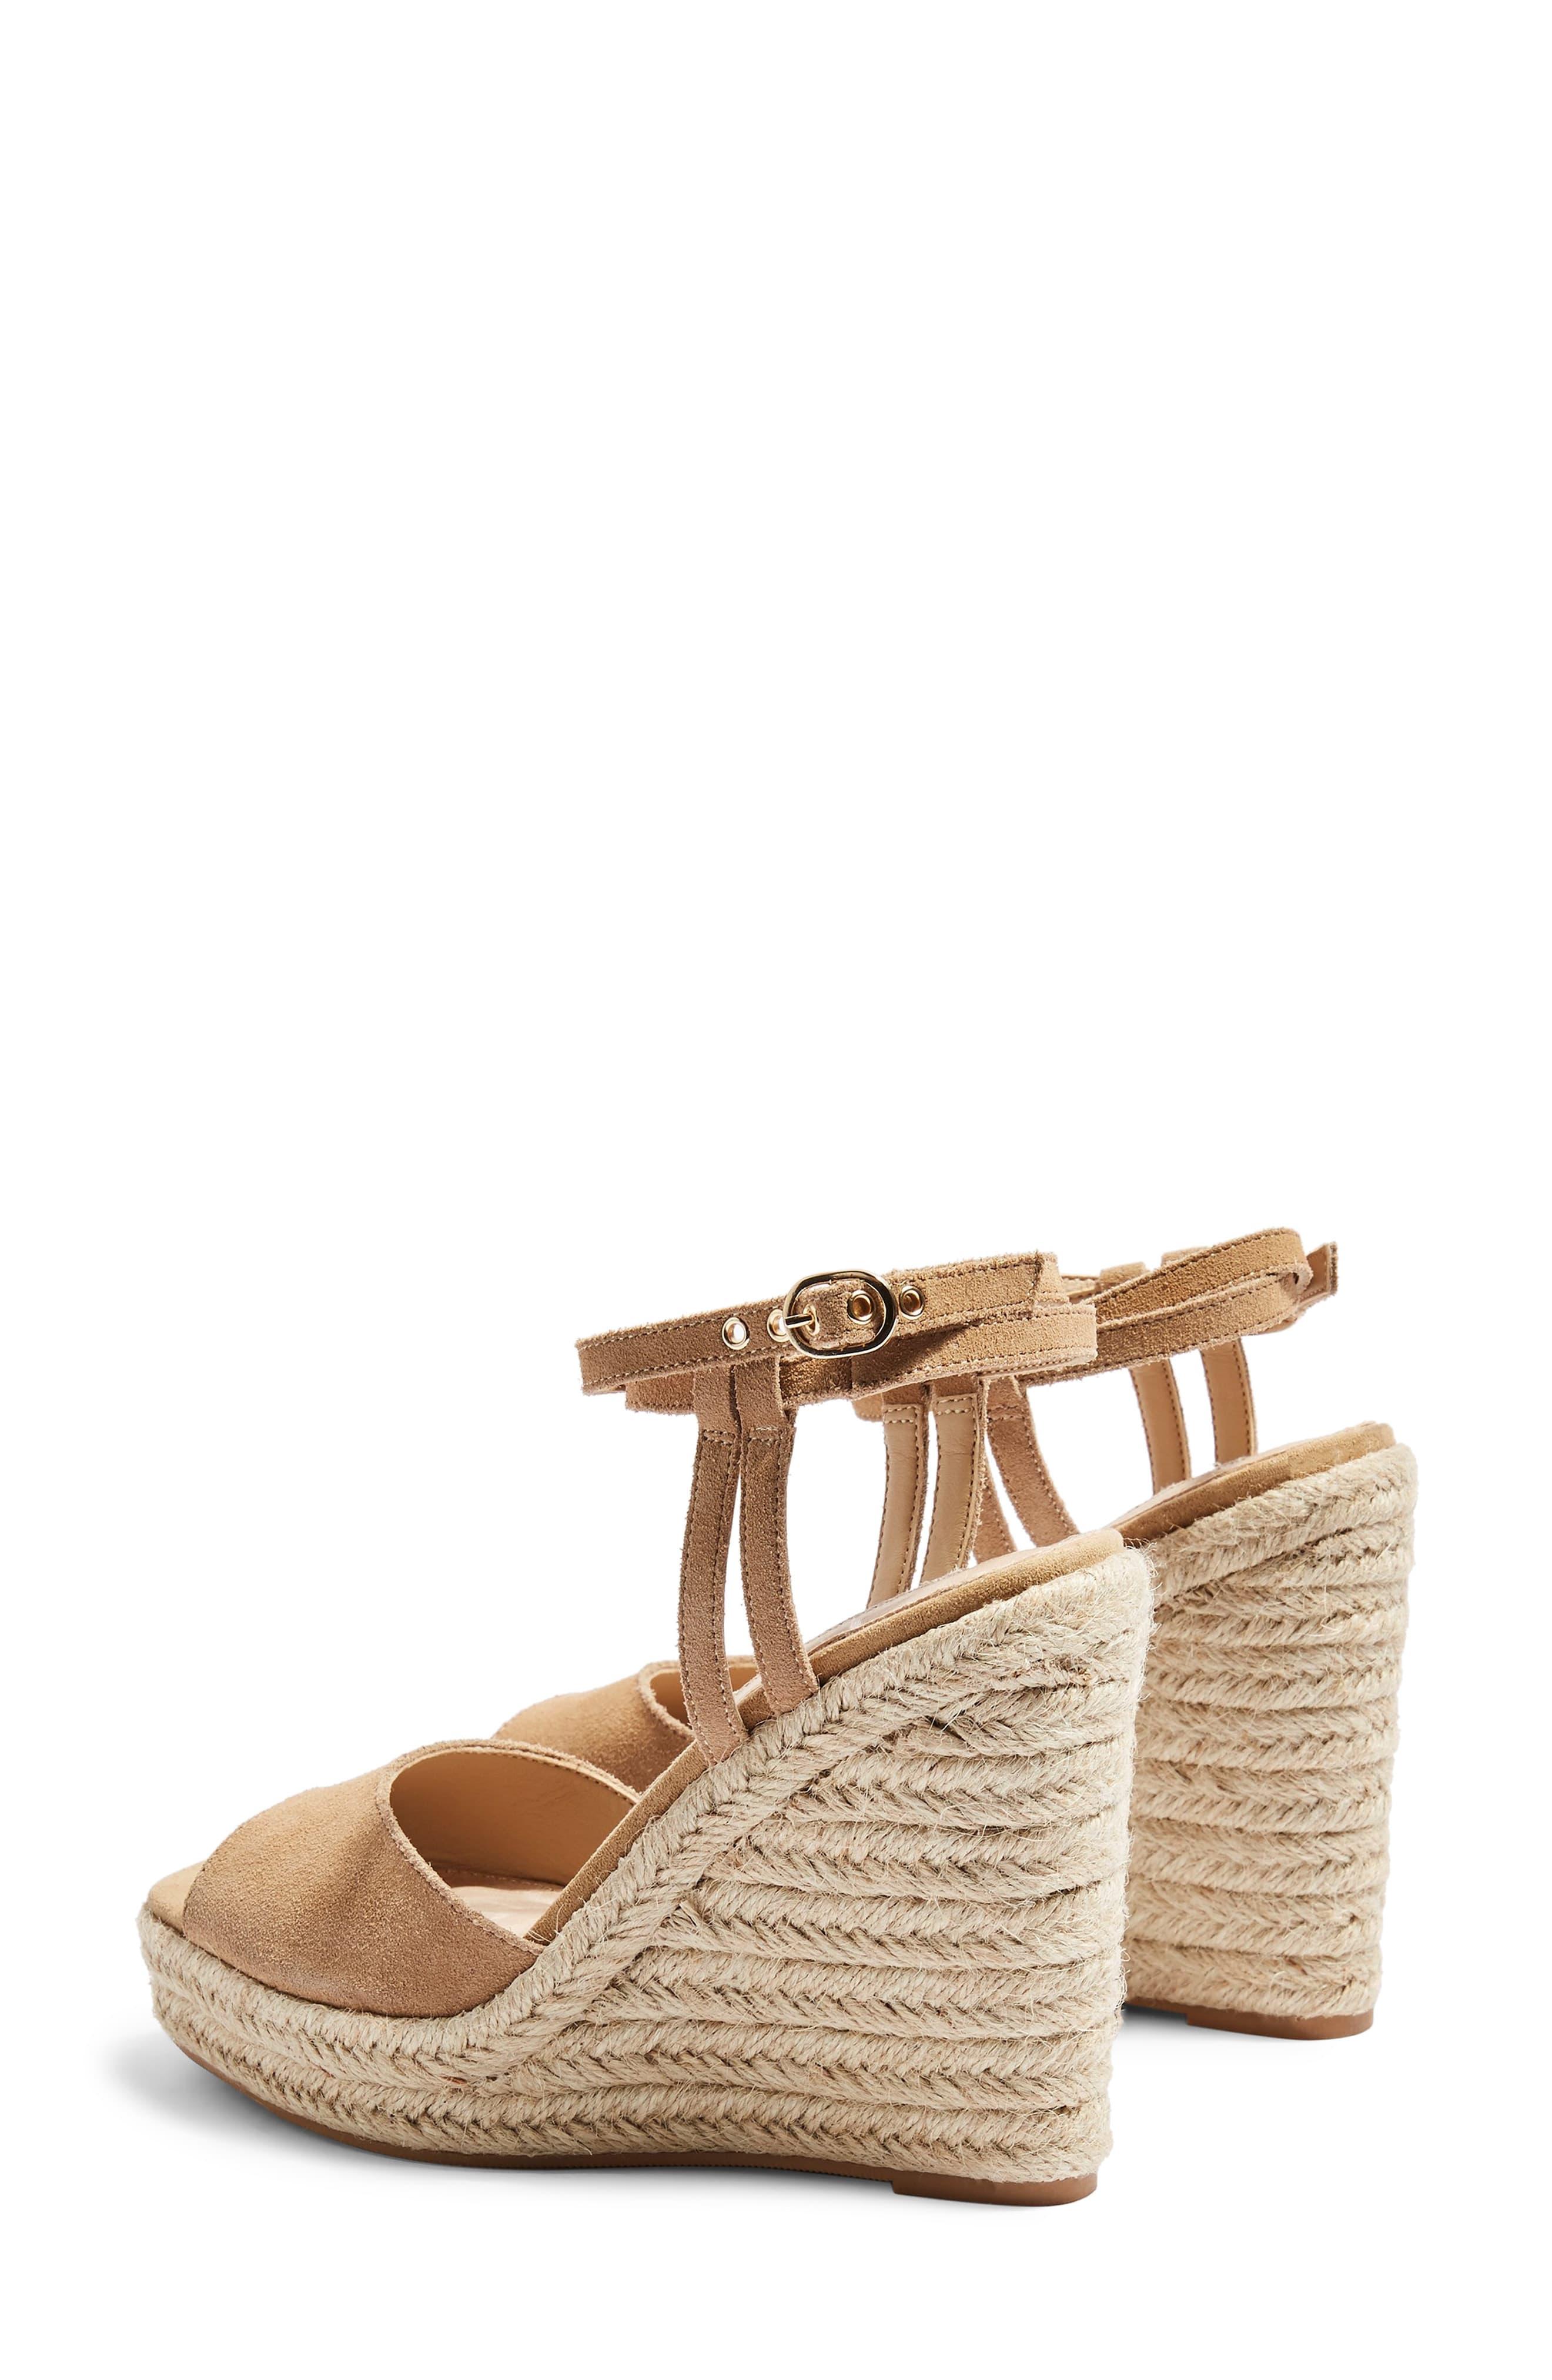 TOPSHOP Leather Whitney Espadrille Wedge in Stone (Natural) - Lyst